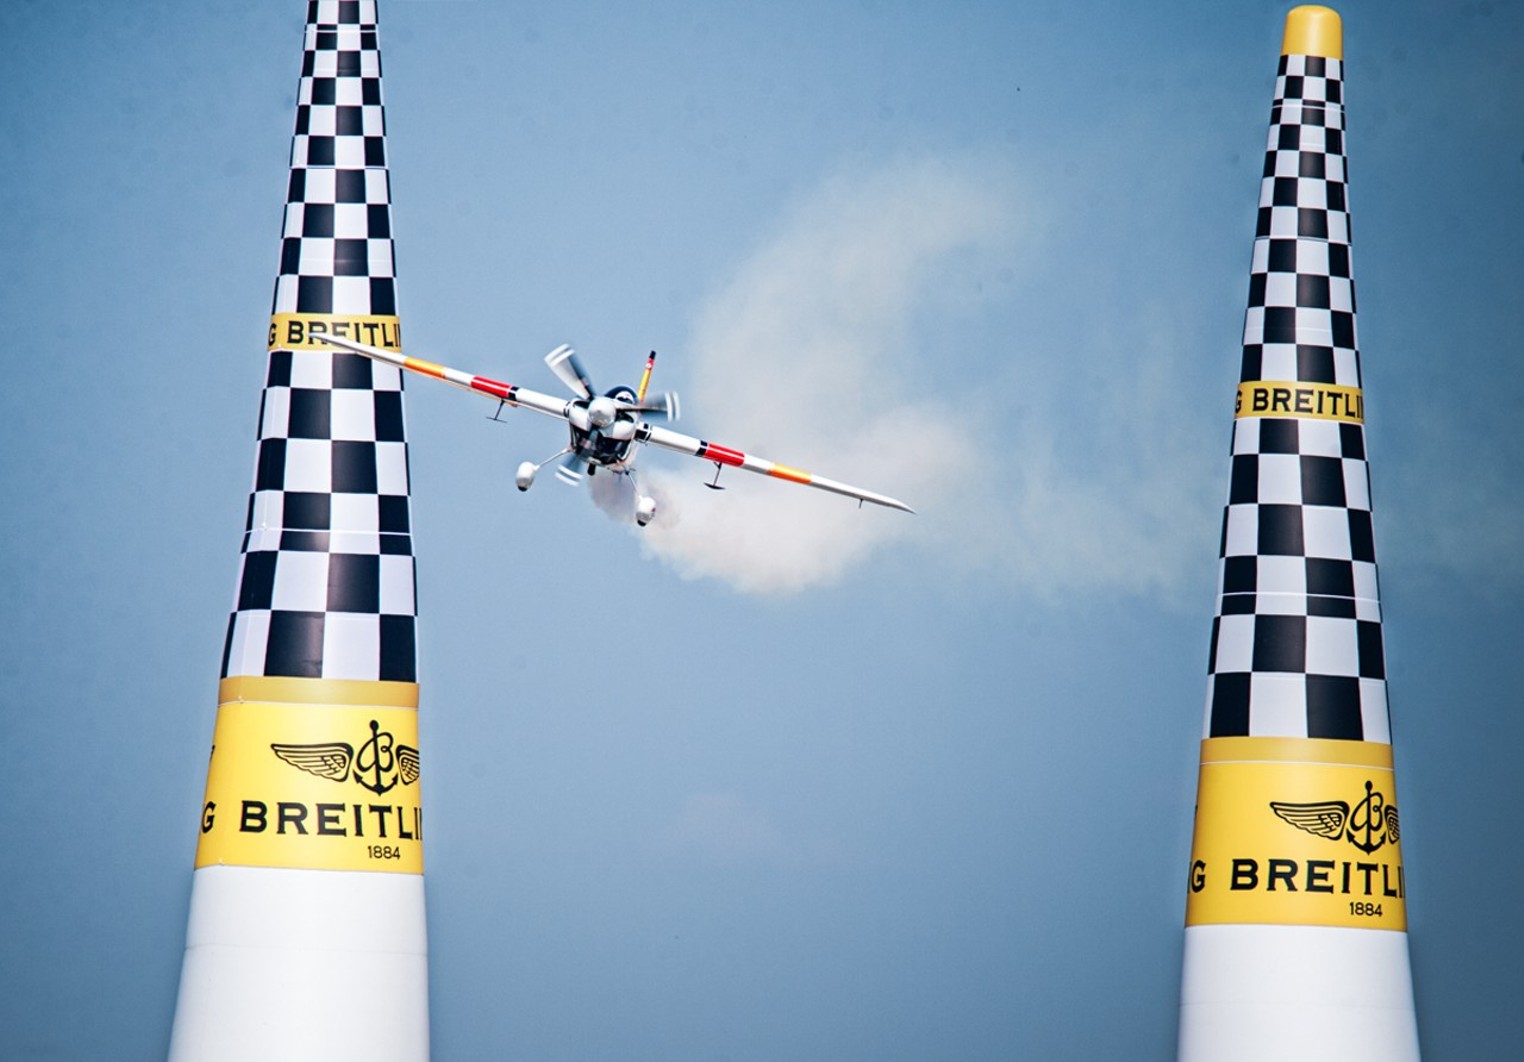 The Crazy Aerial Antics at the Red Bull Air Race | Dallas | Dallas Observer | The Independent News Source in Dallas,